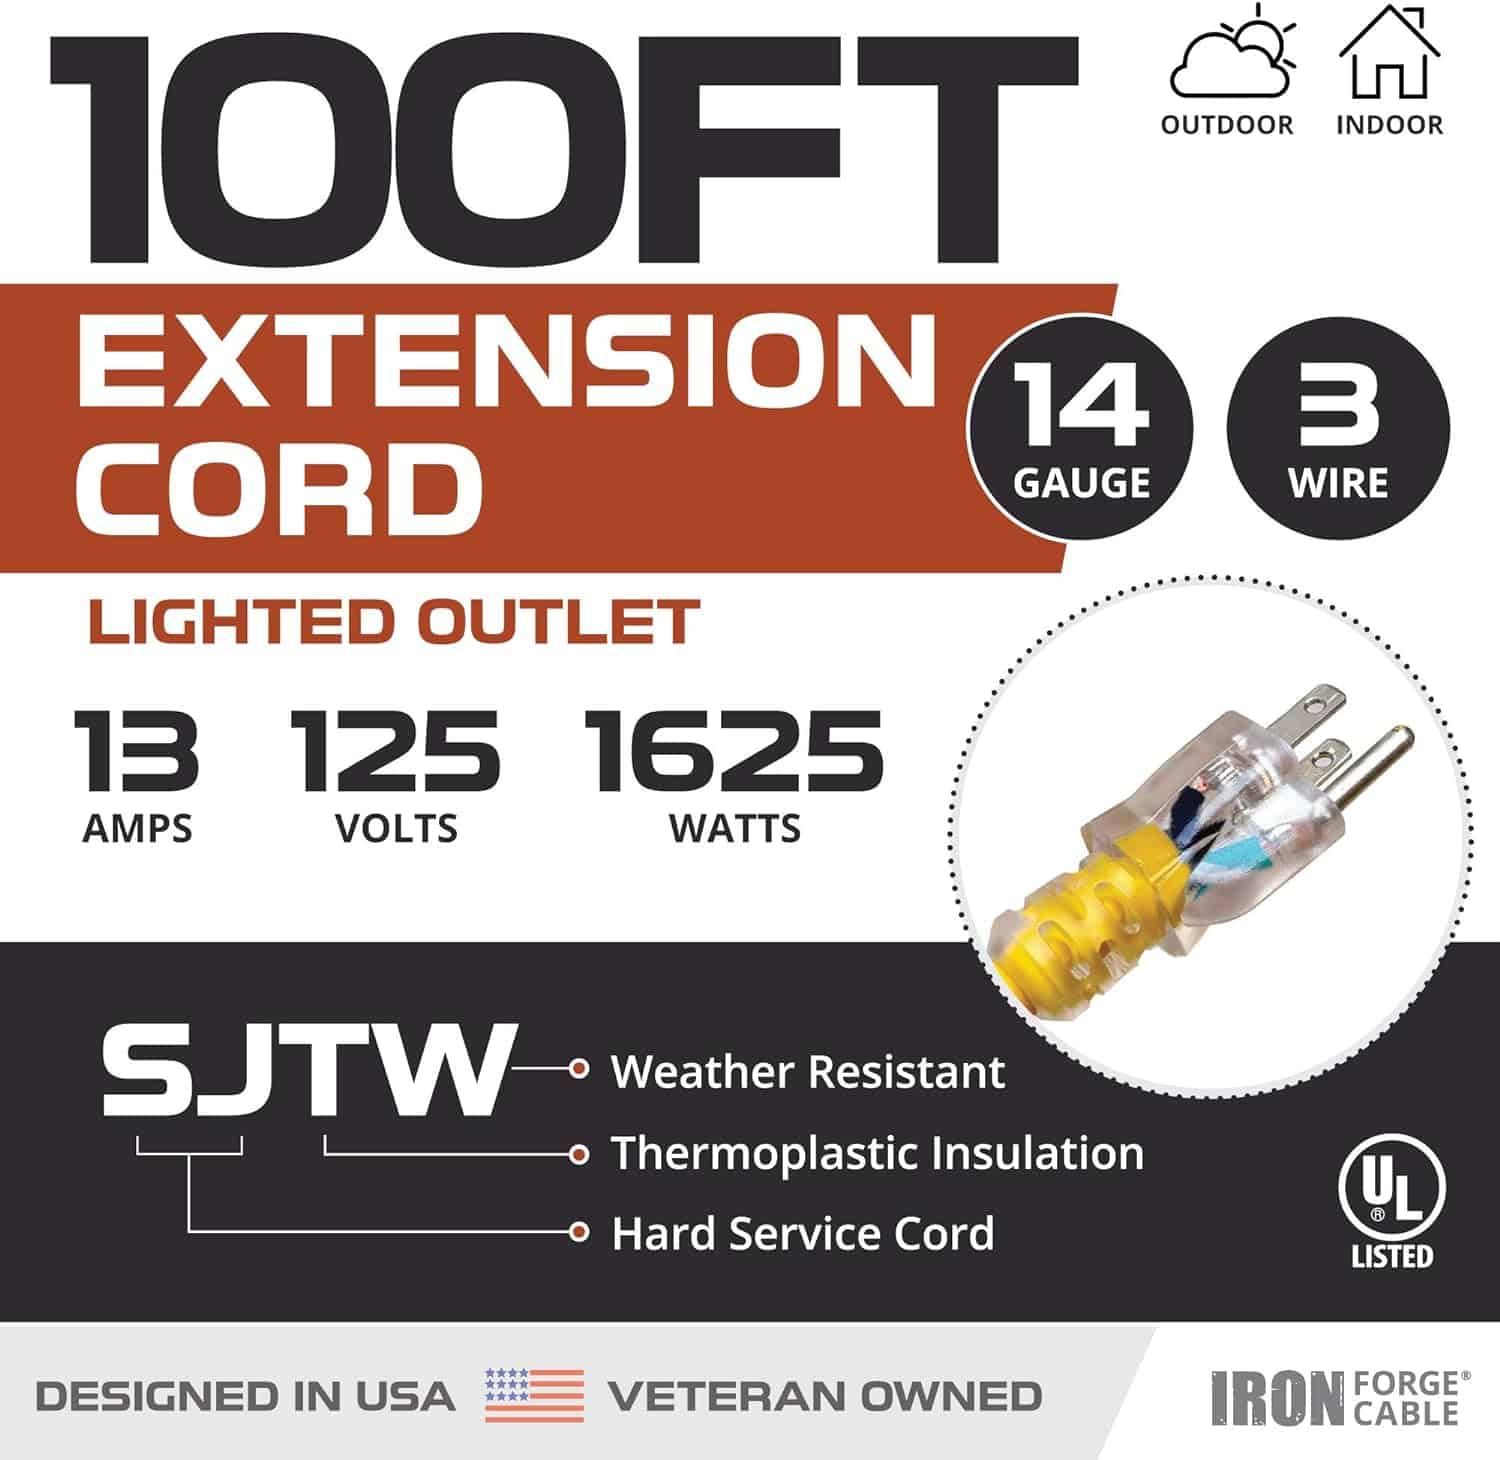 Iron Forge Cable 14 Gauge Extension Cord 100 Ft, Appliance Heavy Duty Extension Cord 100 Foot 3 Prong Lighted Plug, 14 3 Weatherproof Yellow Outdoor Electrical Cable SJTW, 13 Amp, US Veteran Owned 2